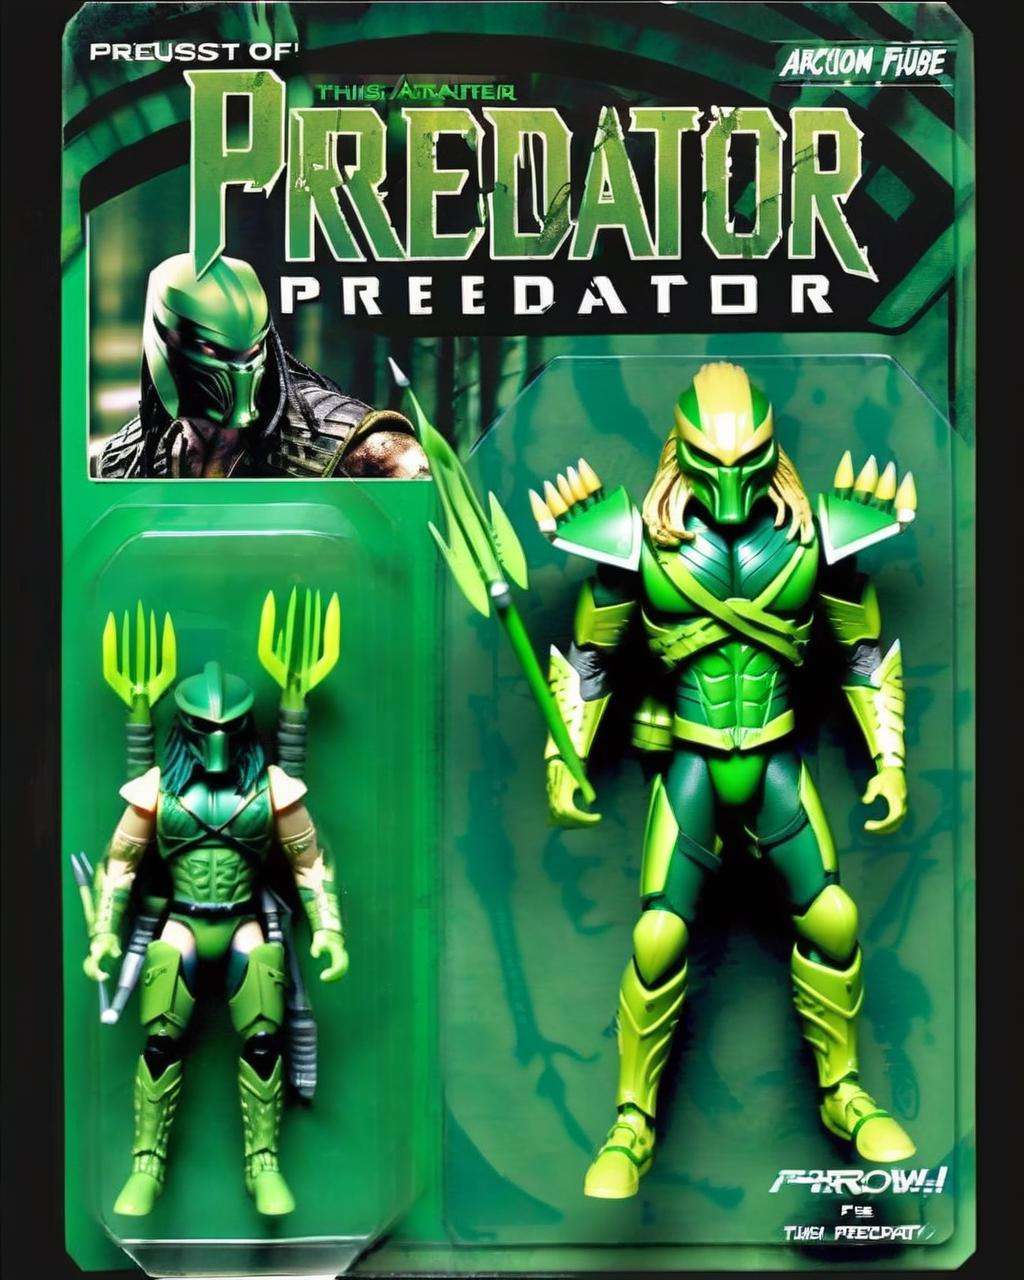 Green-Predator Arrow: A fusion of Green Arrow and Predator, this action figure boasts archery precision:0.6 and extraterrestrial hunting skills:0.4. <lora:Awe_Toys:1.0>